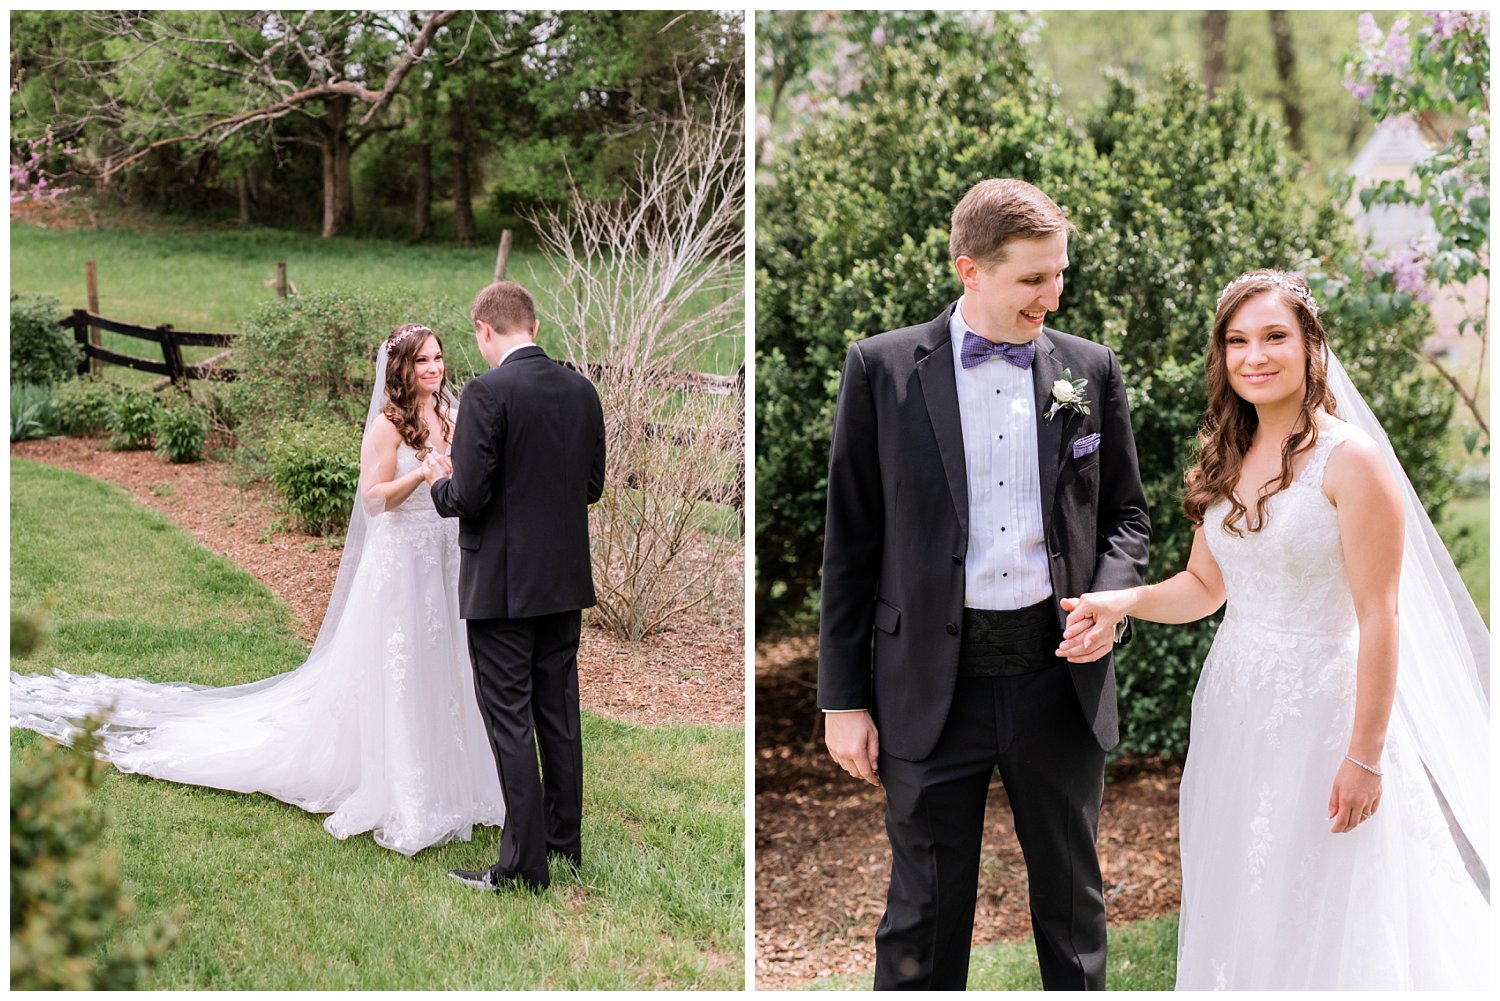 Bride and Groom's first look at their Spring Wedding at The Market at Grelen photographed by Heather Dodge Photography